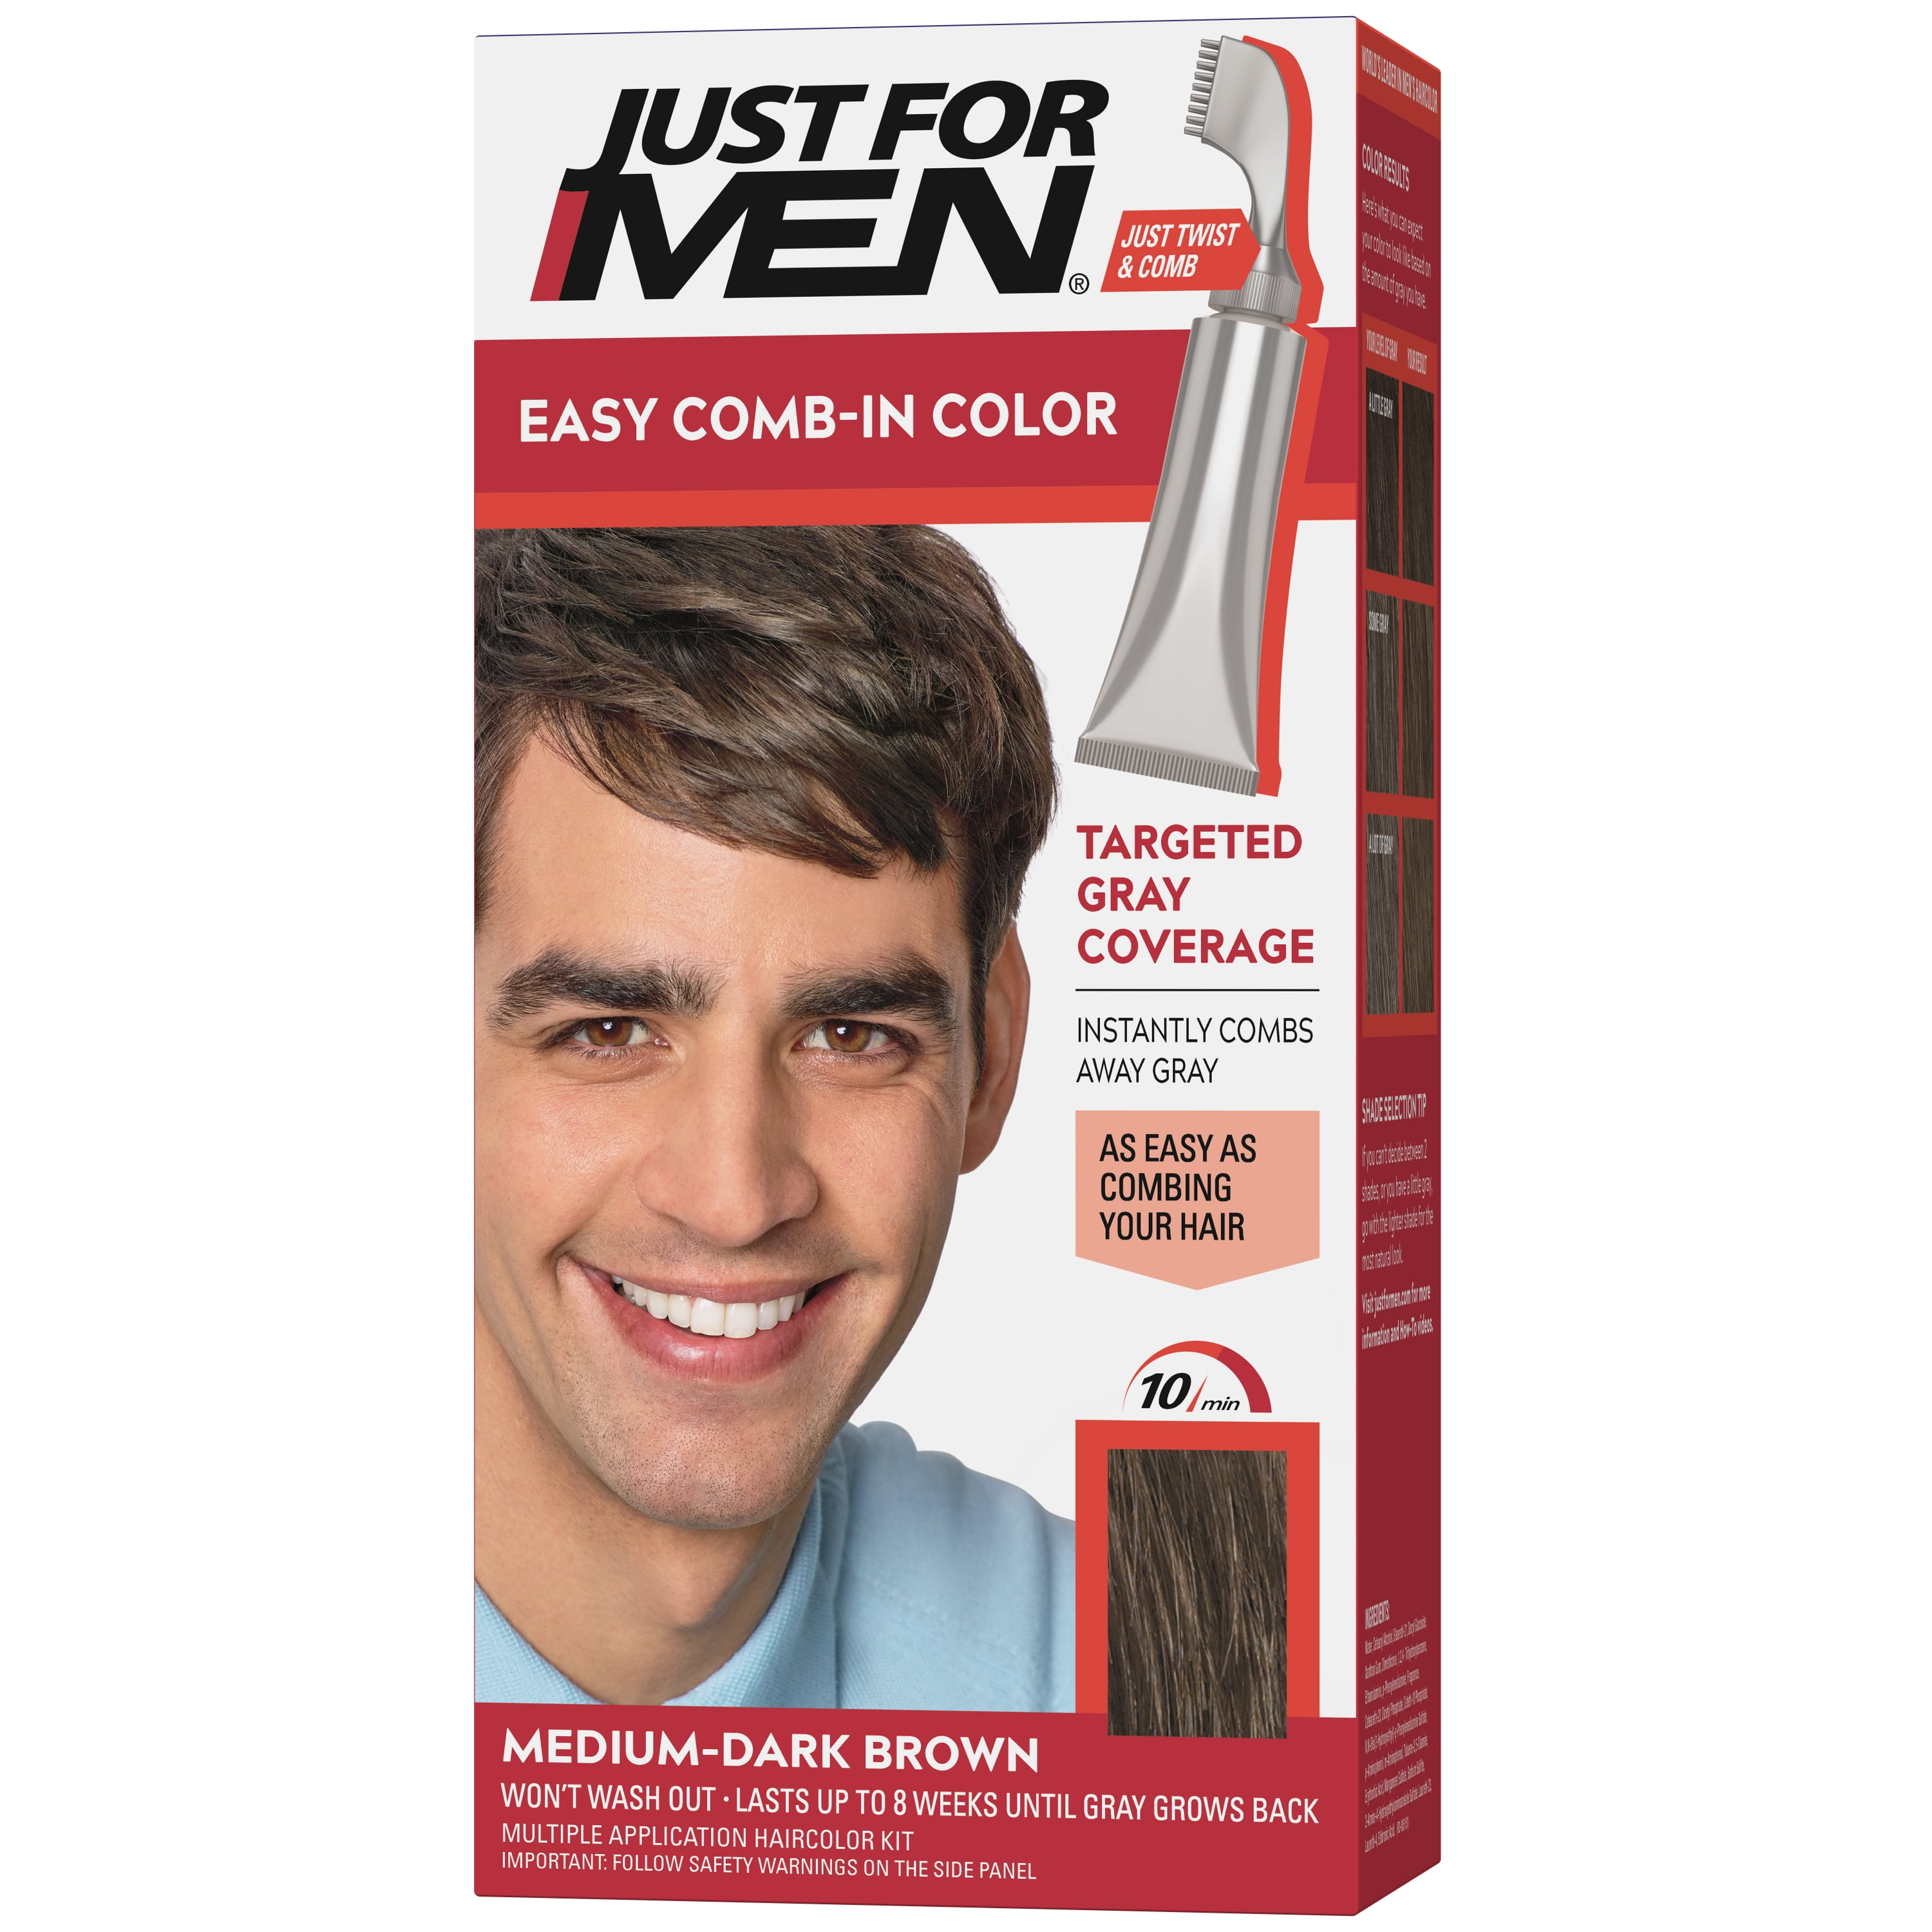 Just For Men Easy Comb-in Gray Hair Color with Applicator, Medium Dark Brown,  A-40 